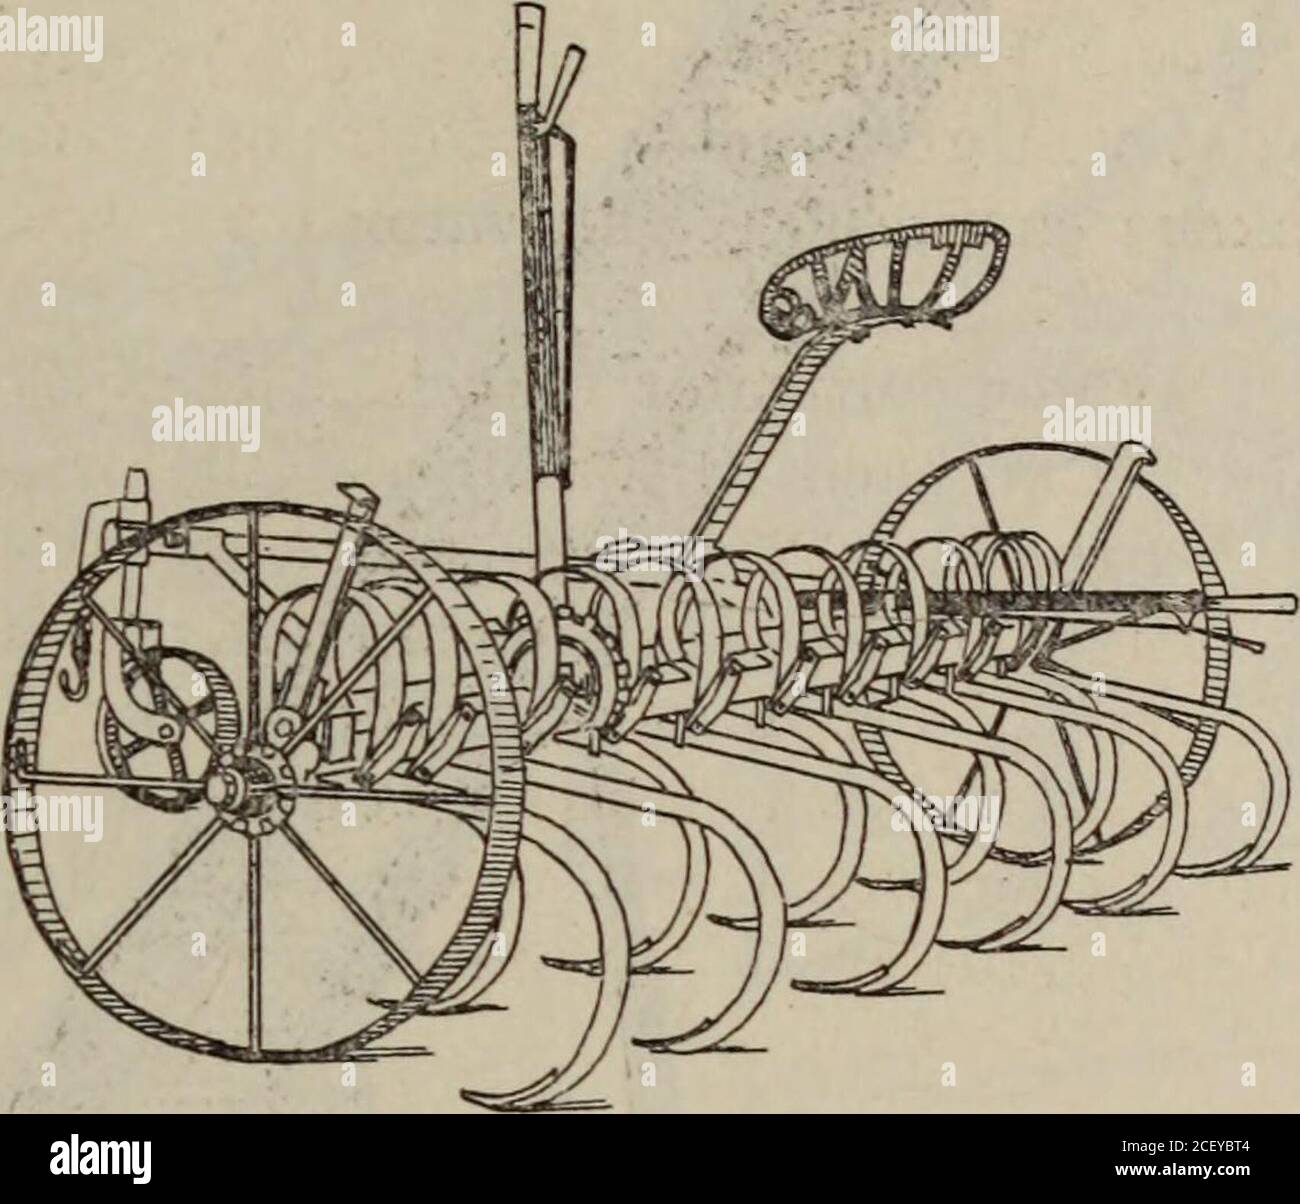 . COMMERCIAL INTELLIGENCE JOURNAL (CANADA) 1917 pt. 1. Solid Tine Cultivator. This patent steel cultivator of English manufacture is fitted with side levers andlong expanding axles to the road wheels so that it can be used as a ridger or scufflerto cover 24-inch to 30-inch ridges. Two lifting levers are provided which can beoperated either from the seat or when walking behind the machine for lifting thetines when turning at the headlands or altering the pitch. By means-of the side levers,which-have ample range to adjust the machine, and the expanding axle, the depth ofthe work can be altered w Stock Photo